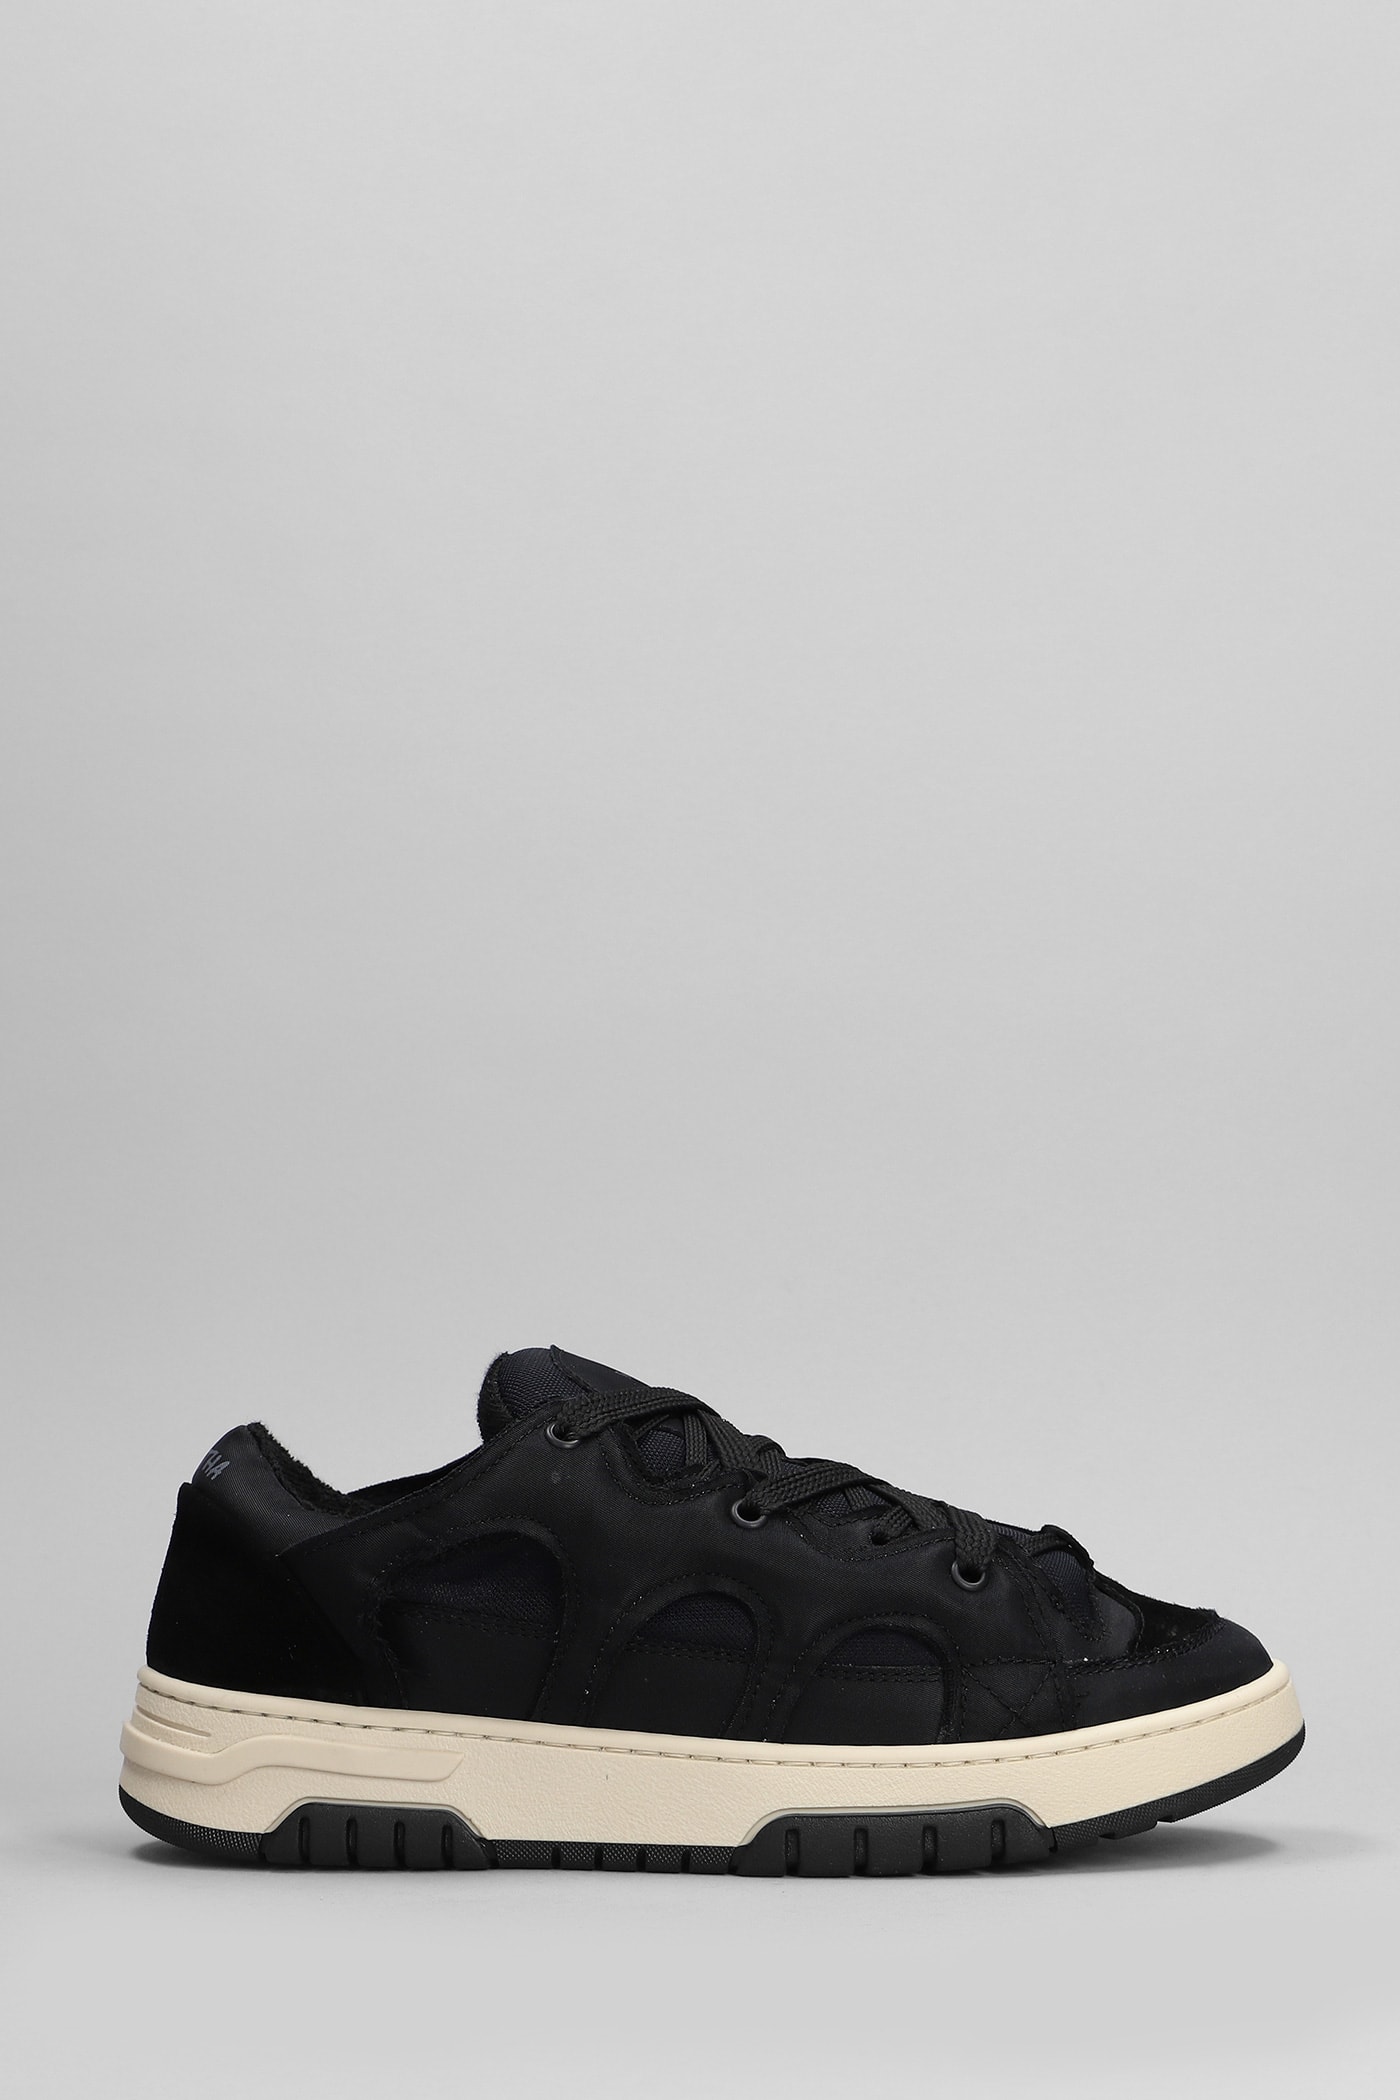 Paura Santha 1 Trainers In Black Suede And Fabric